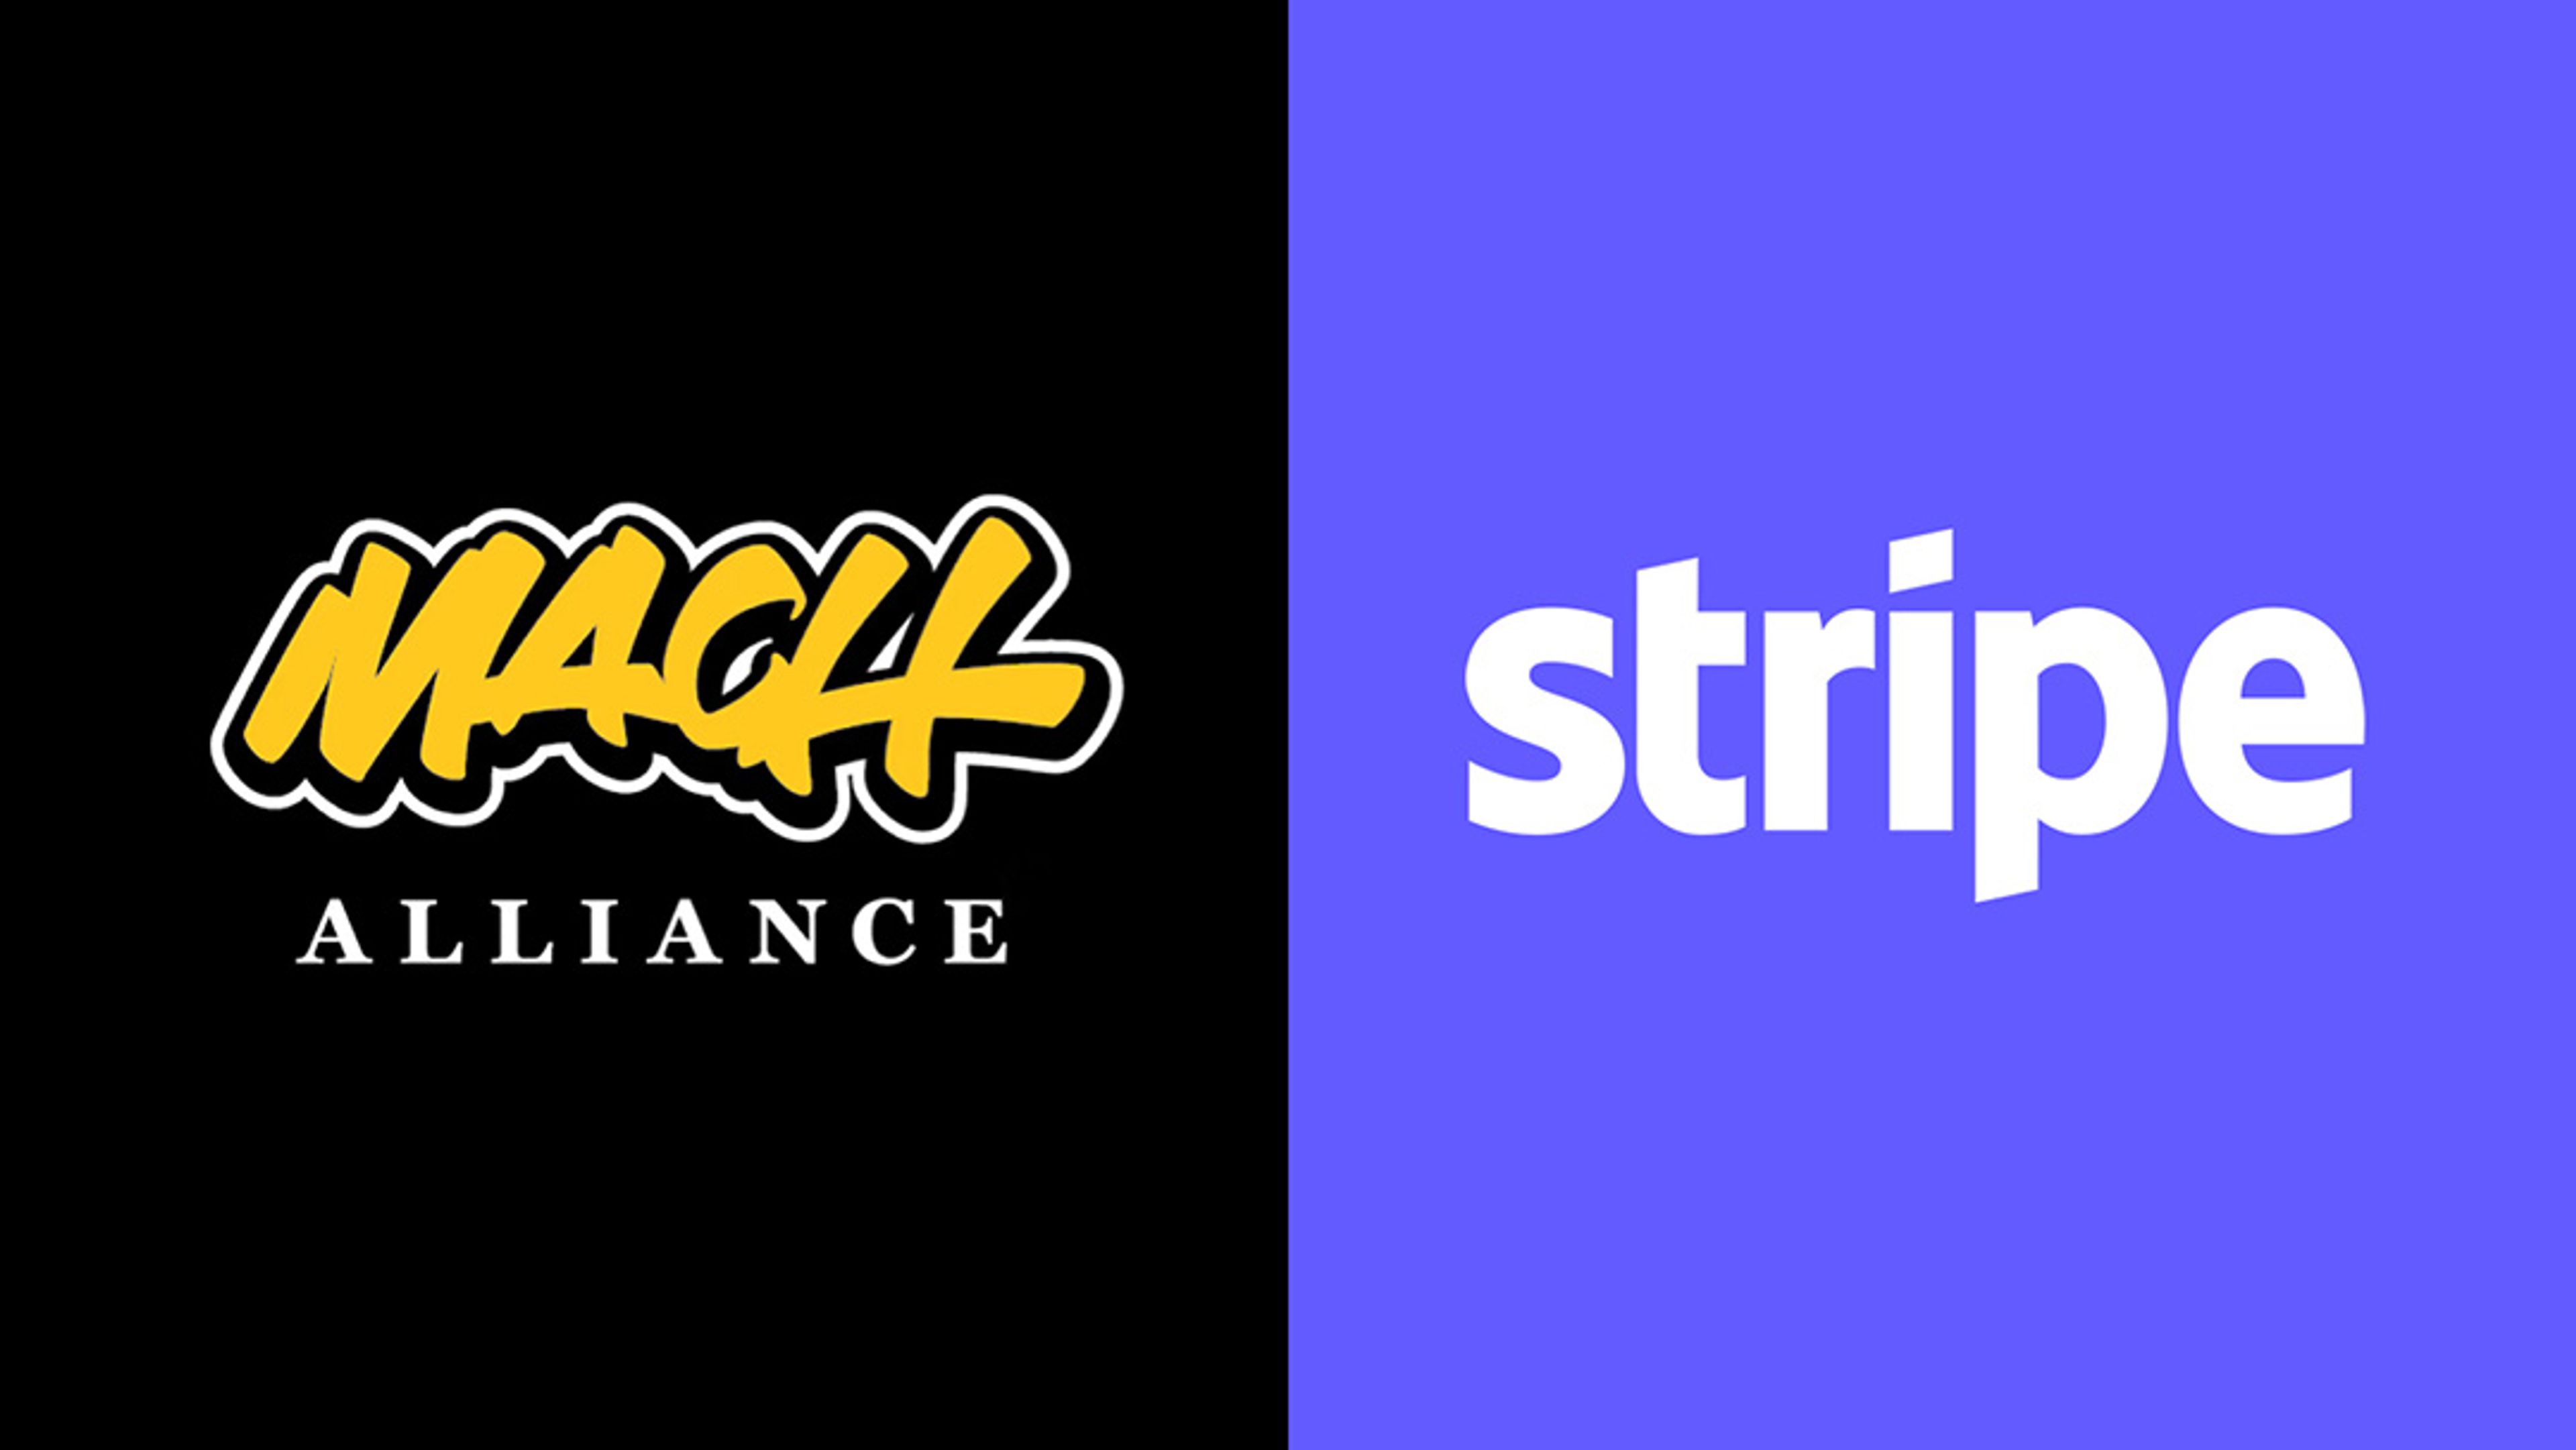 MACH Alliance and Stripe logo for announcement